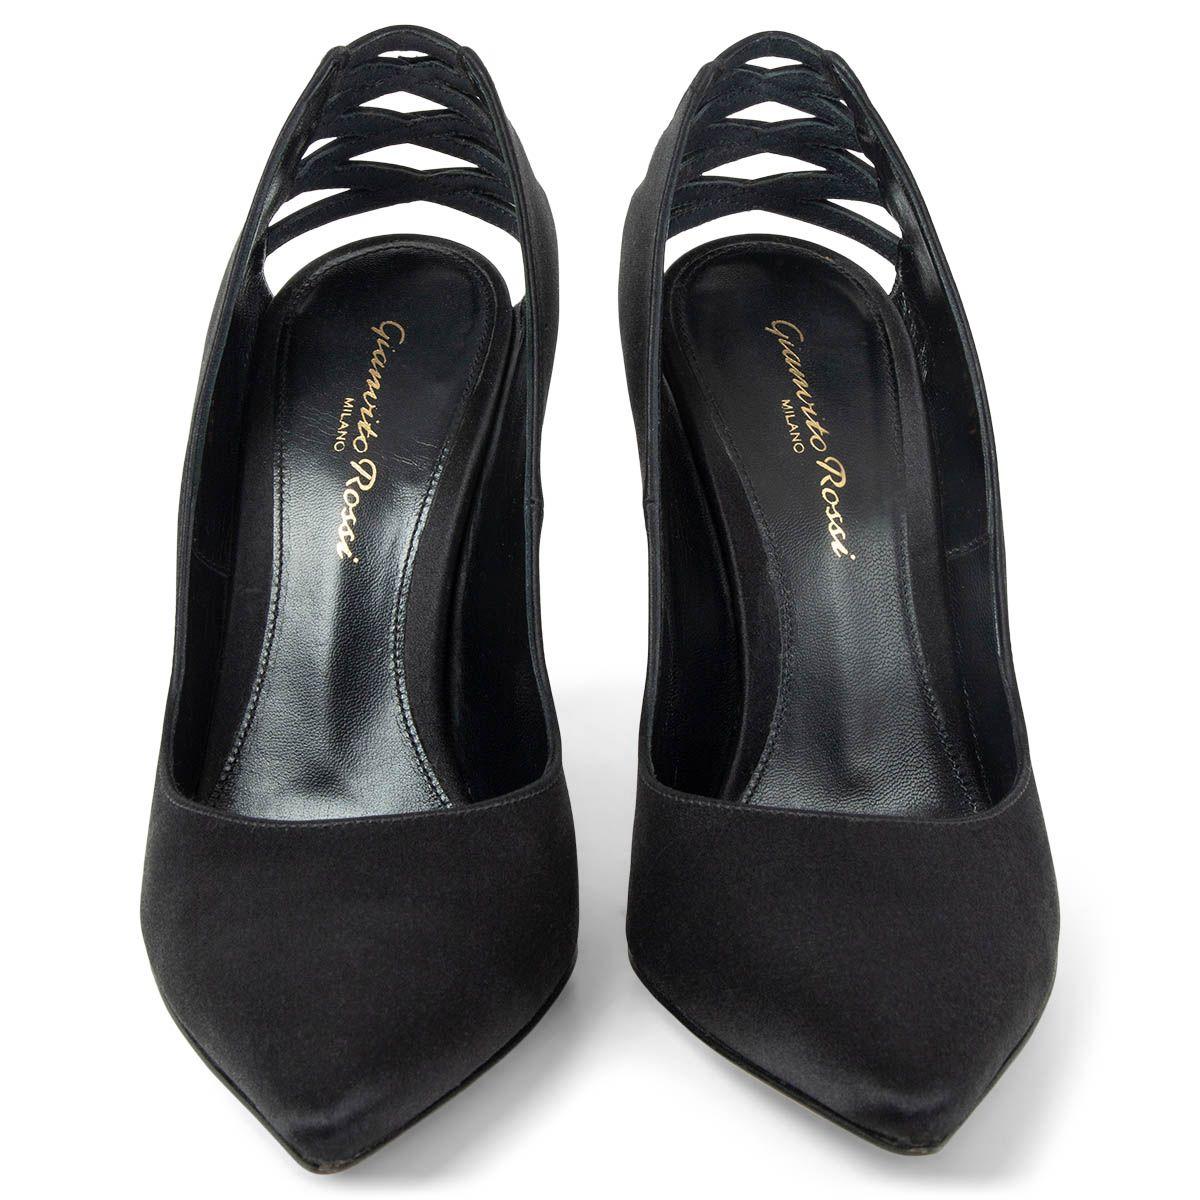 100% authentic Gianvito Rossi pointed-toe pumps in black satin with lacing detail at the heel. Have been worn once and are in excellent condition. 

Measurements
Imprinted Size	37
Shoe Size	37
Inside Sole	24cm (9.4in)
Width	7cm (2.7in)
Heel	10cm